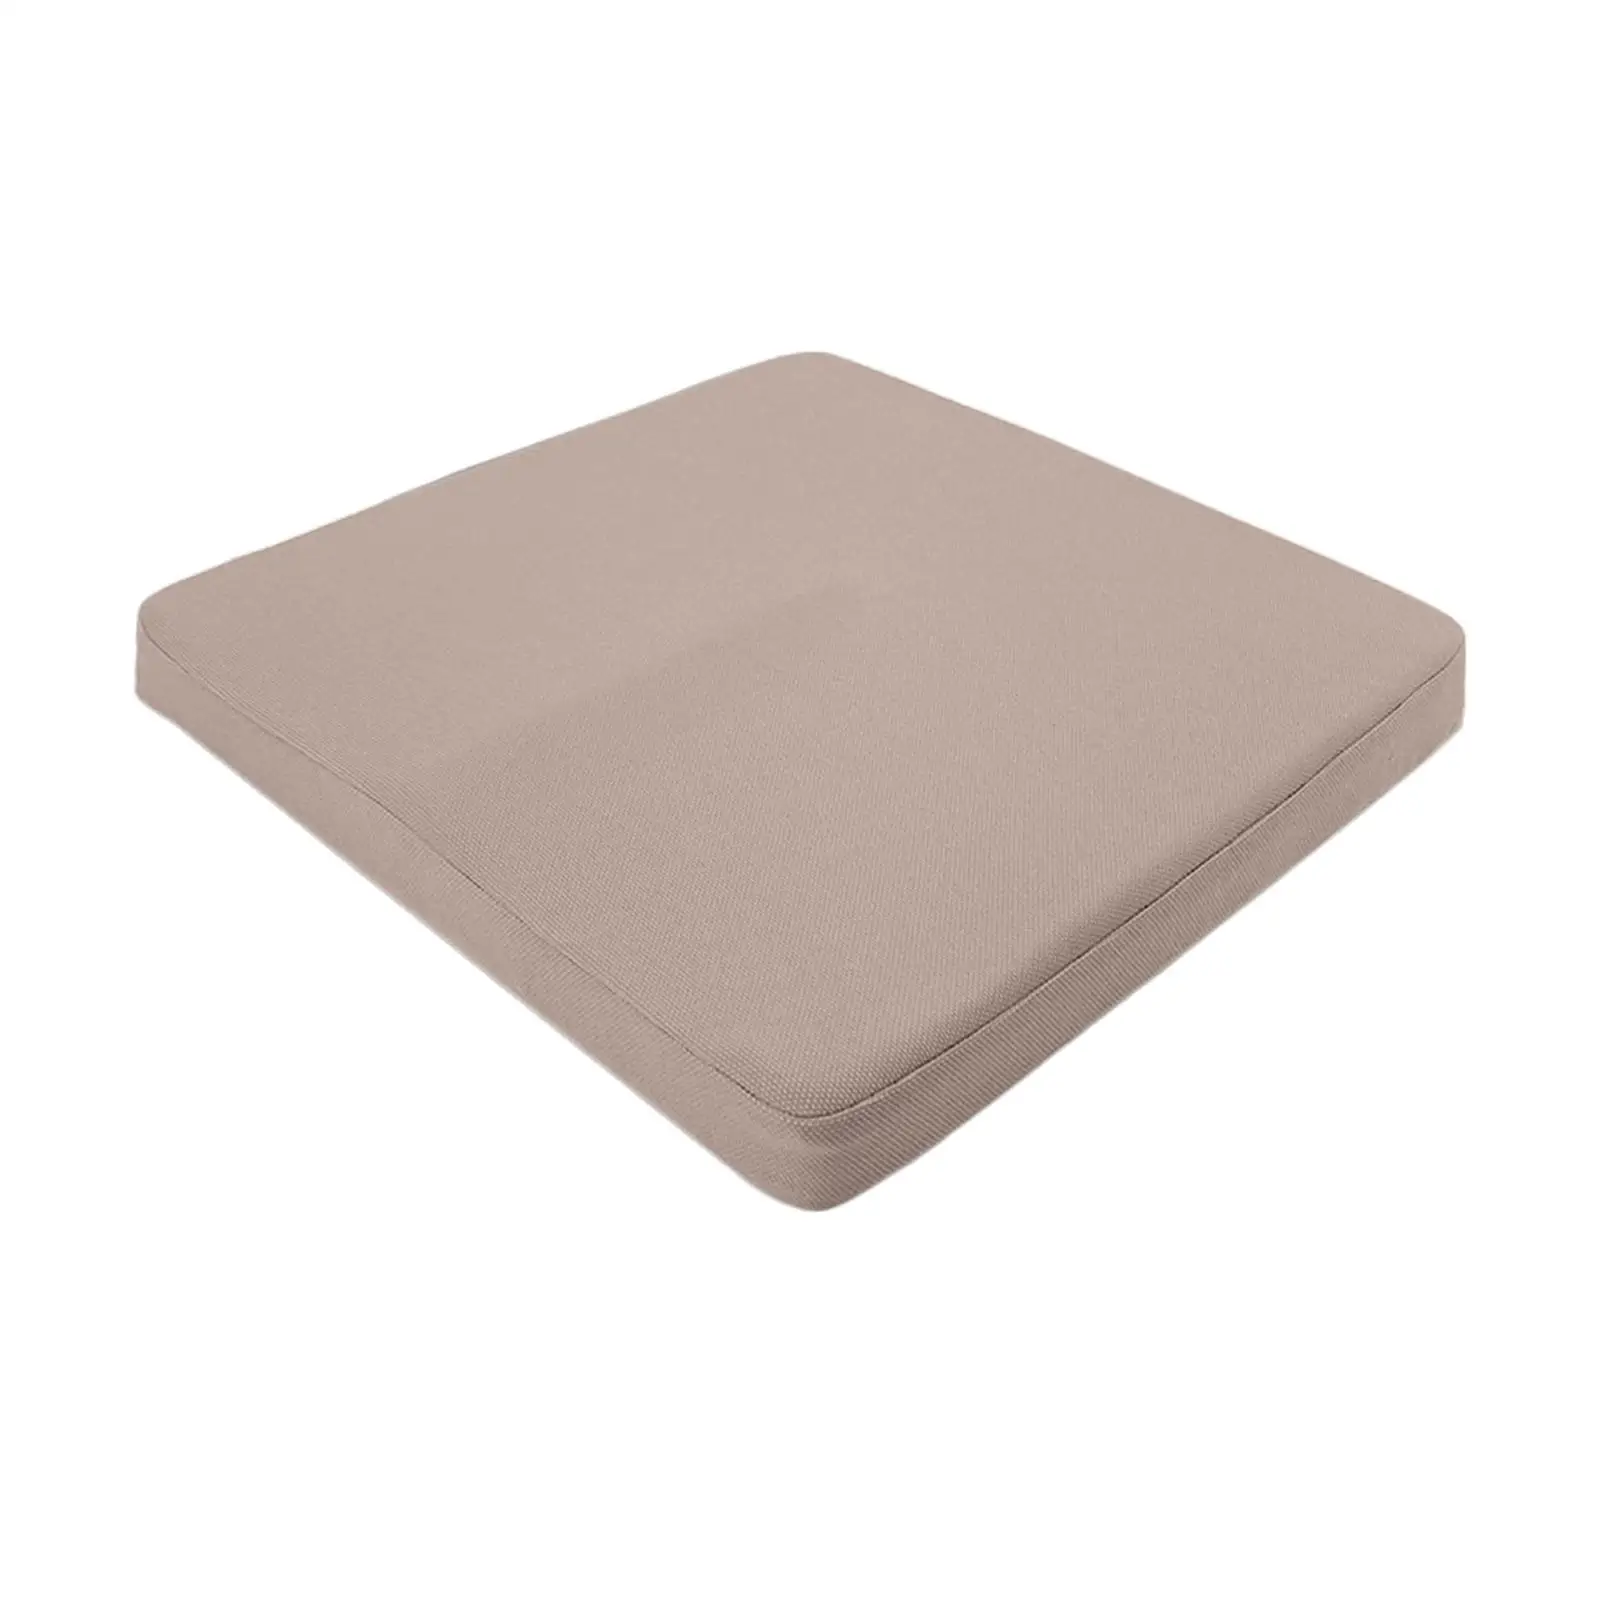 Sitting Pad Thicken Support Anti Slip Comfort Ergonomic Soft Seat Cushion Chair Pad for Office Home Kitchen Dining Chair